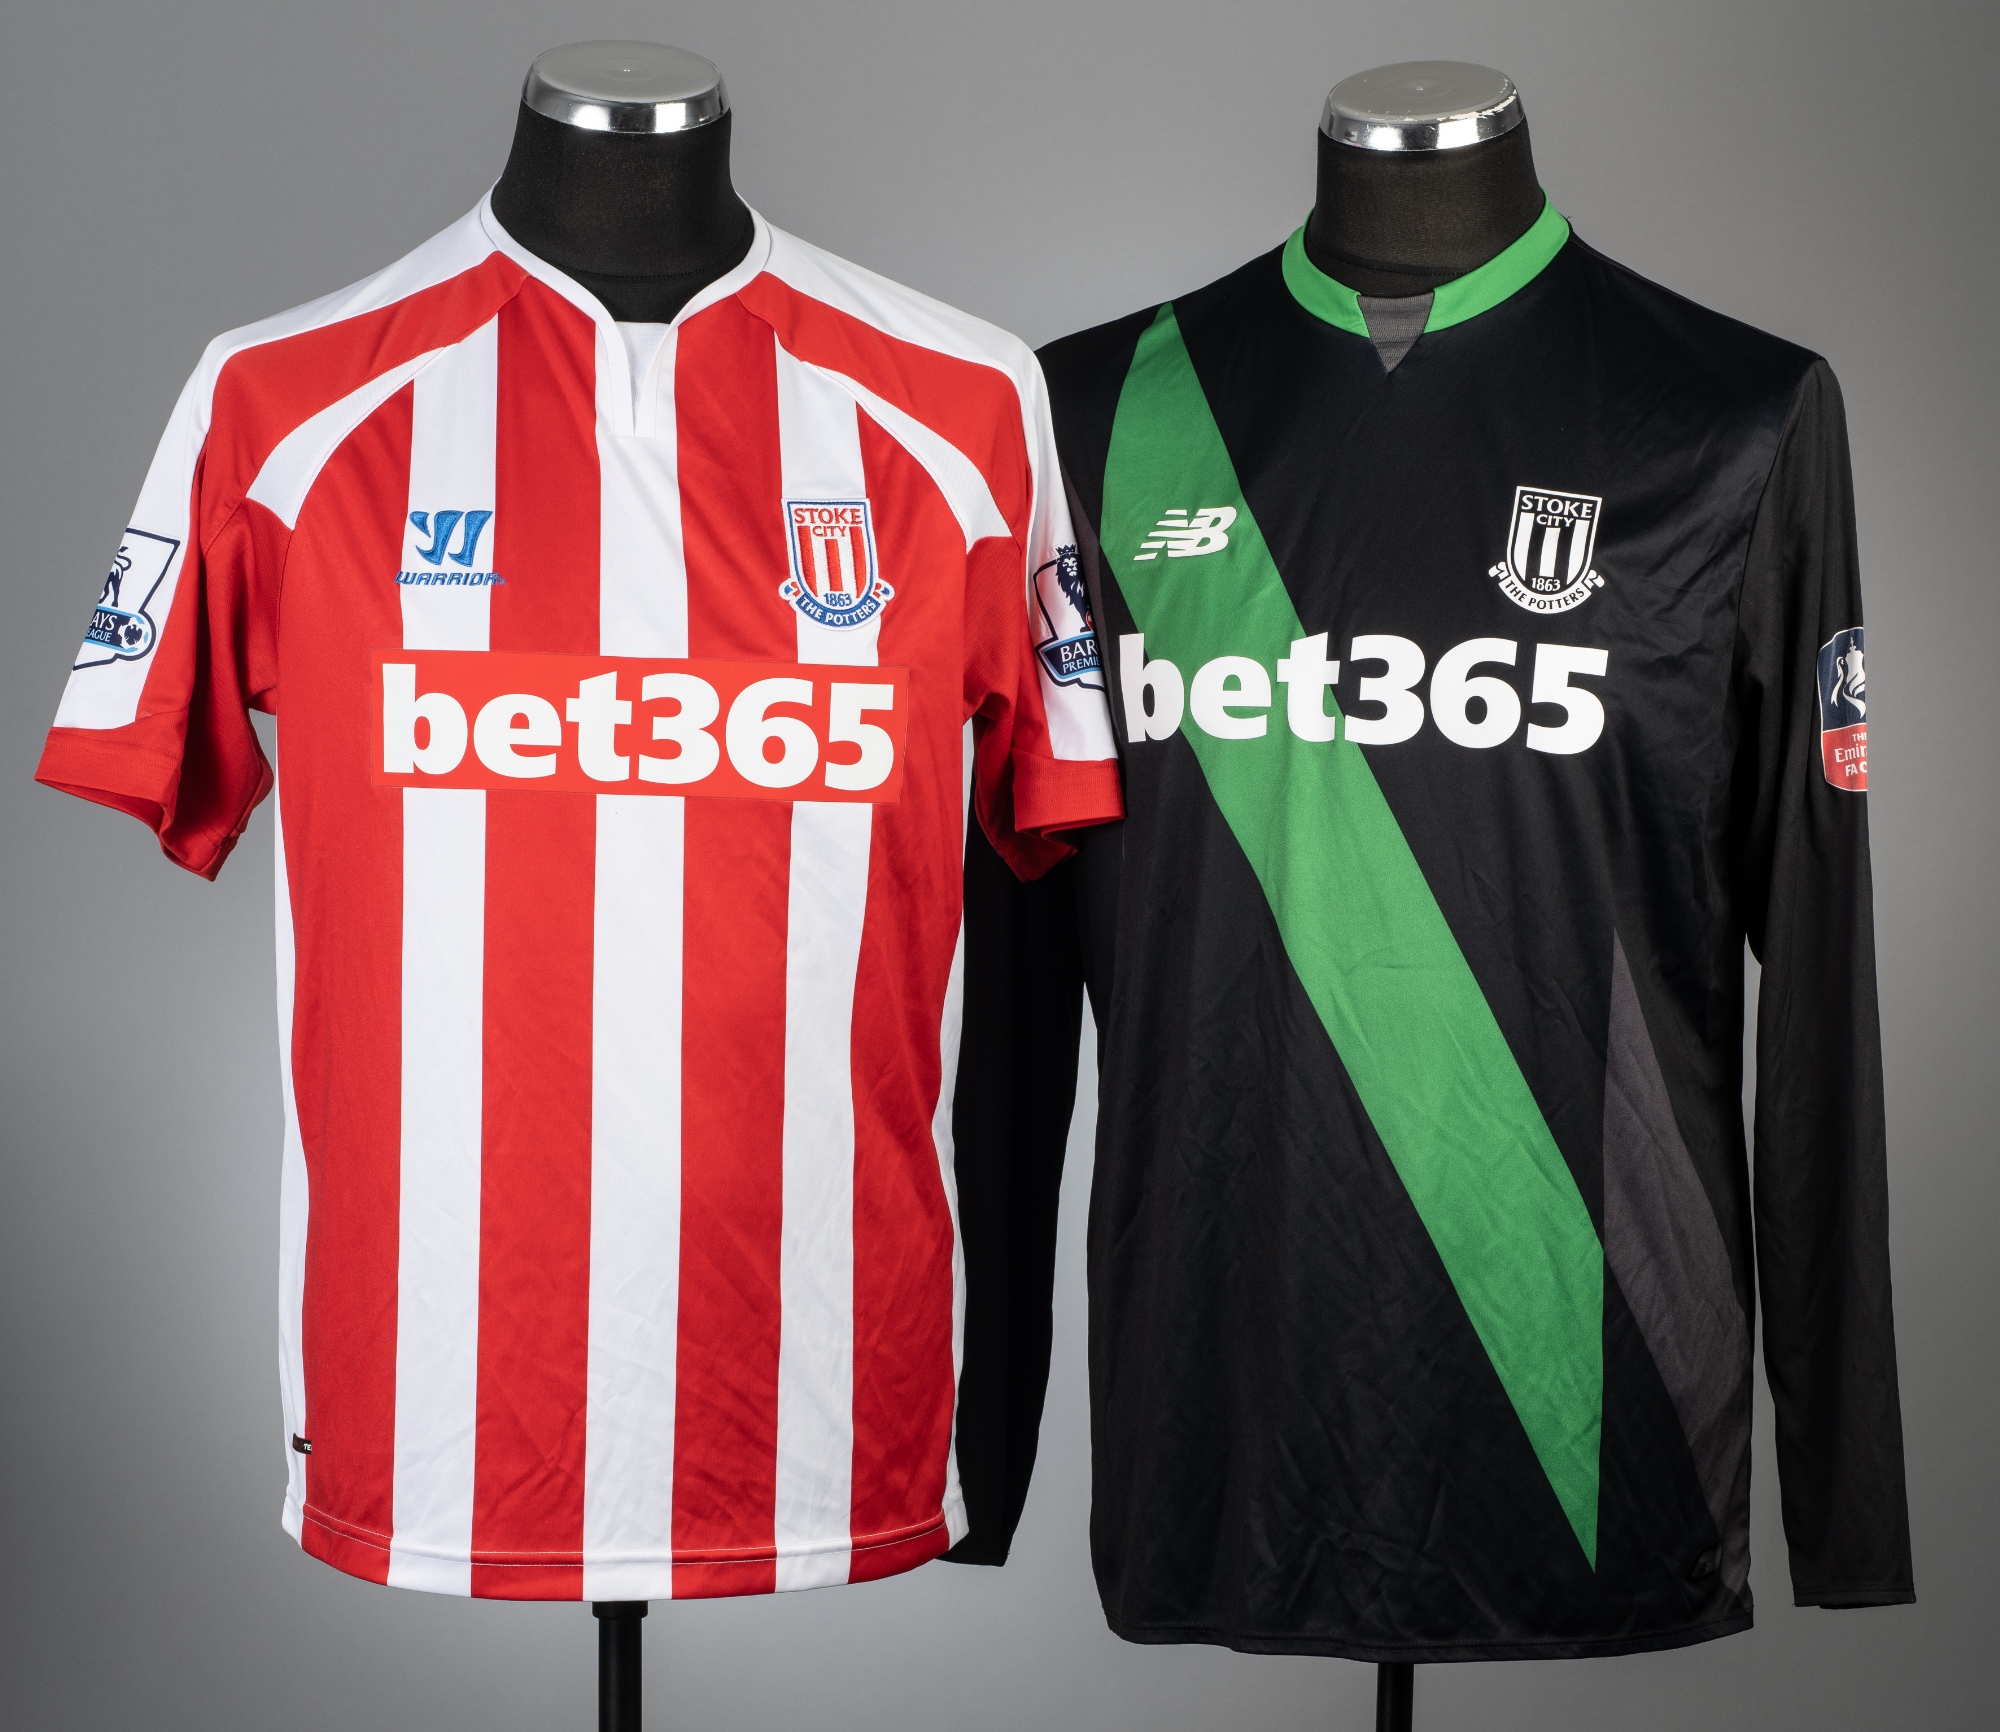 Stoke City players football jerseys and football boots - Image 2 of 8